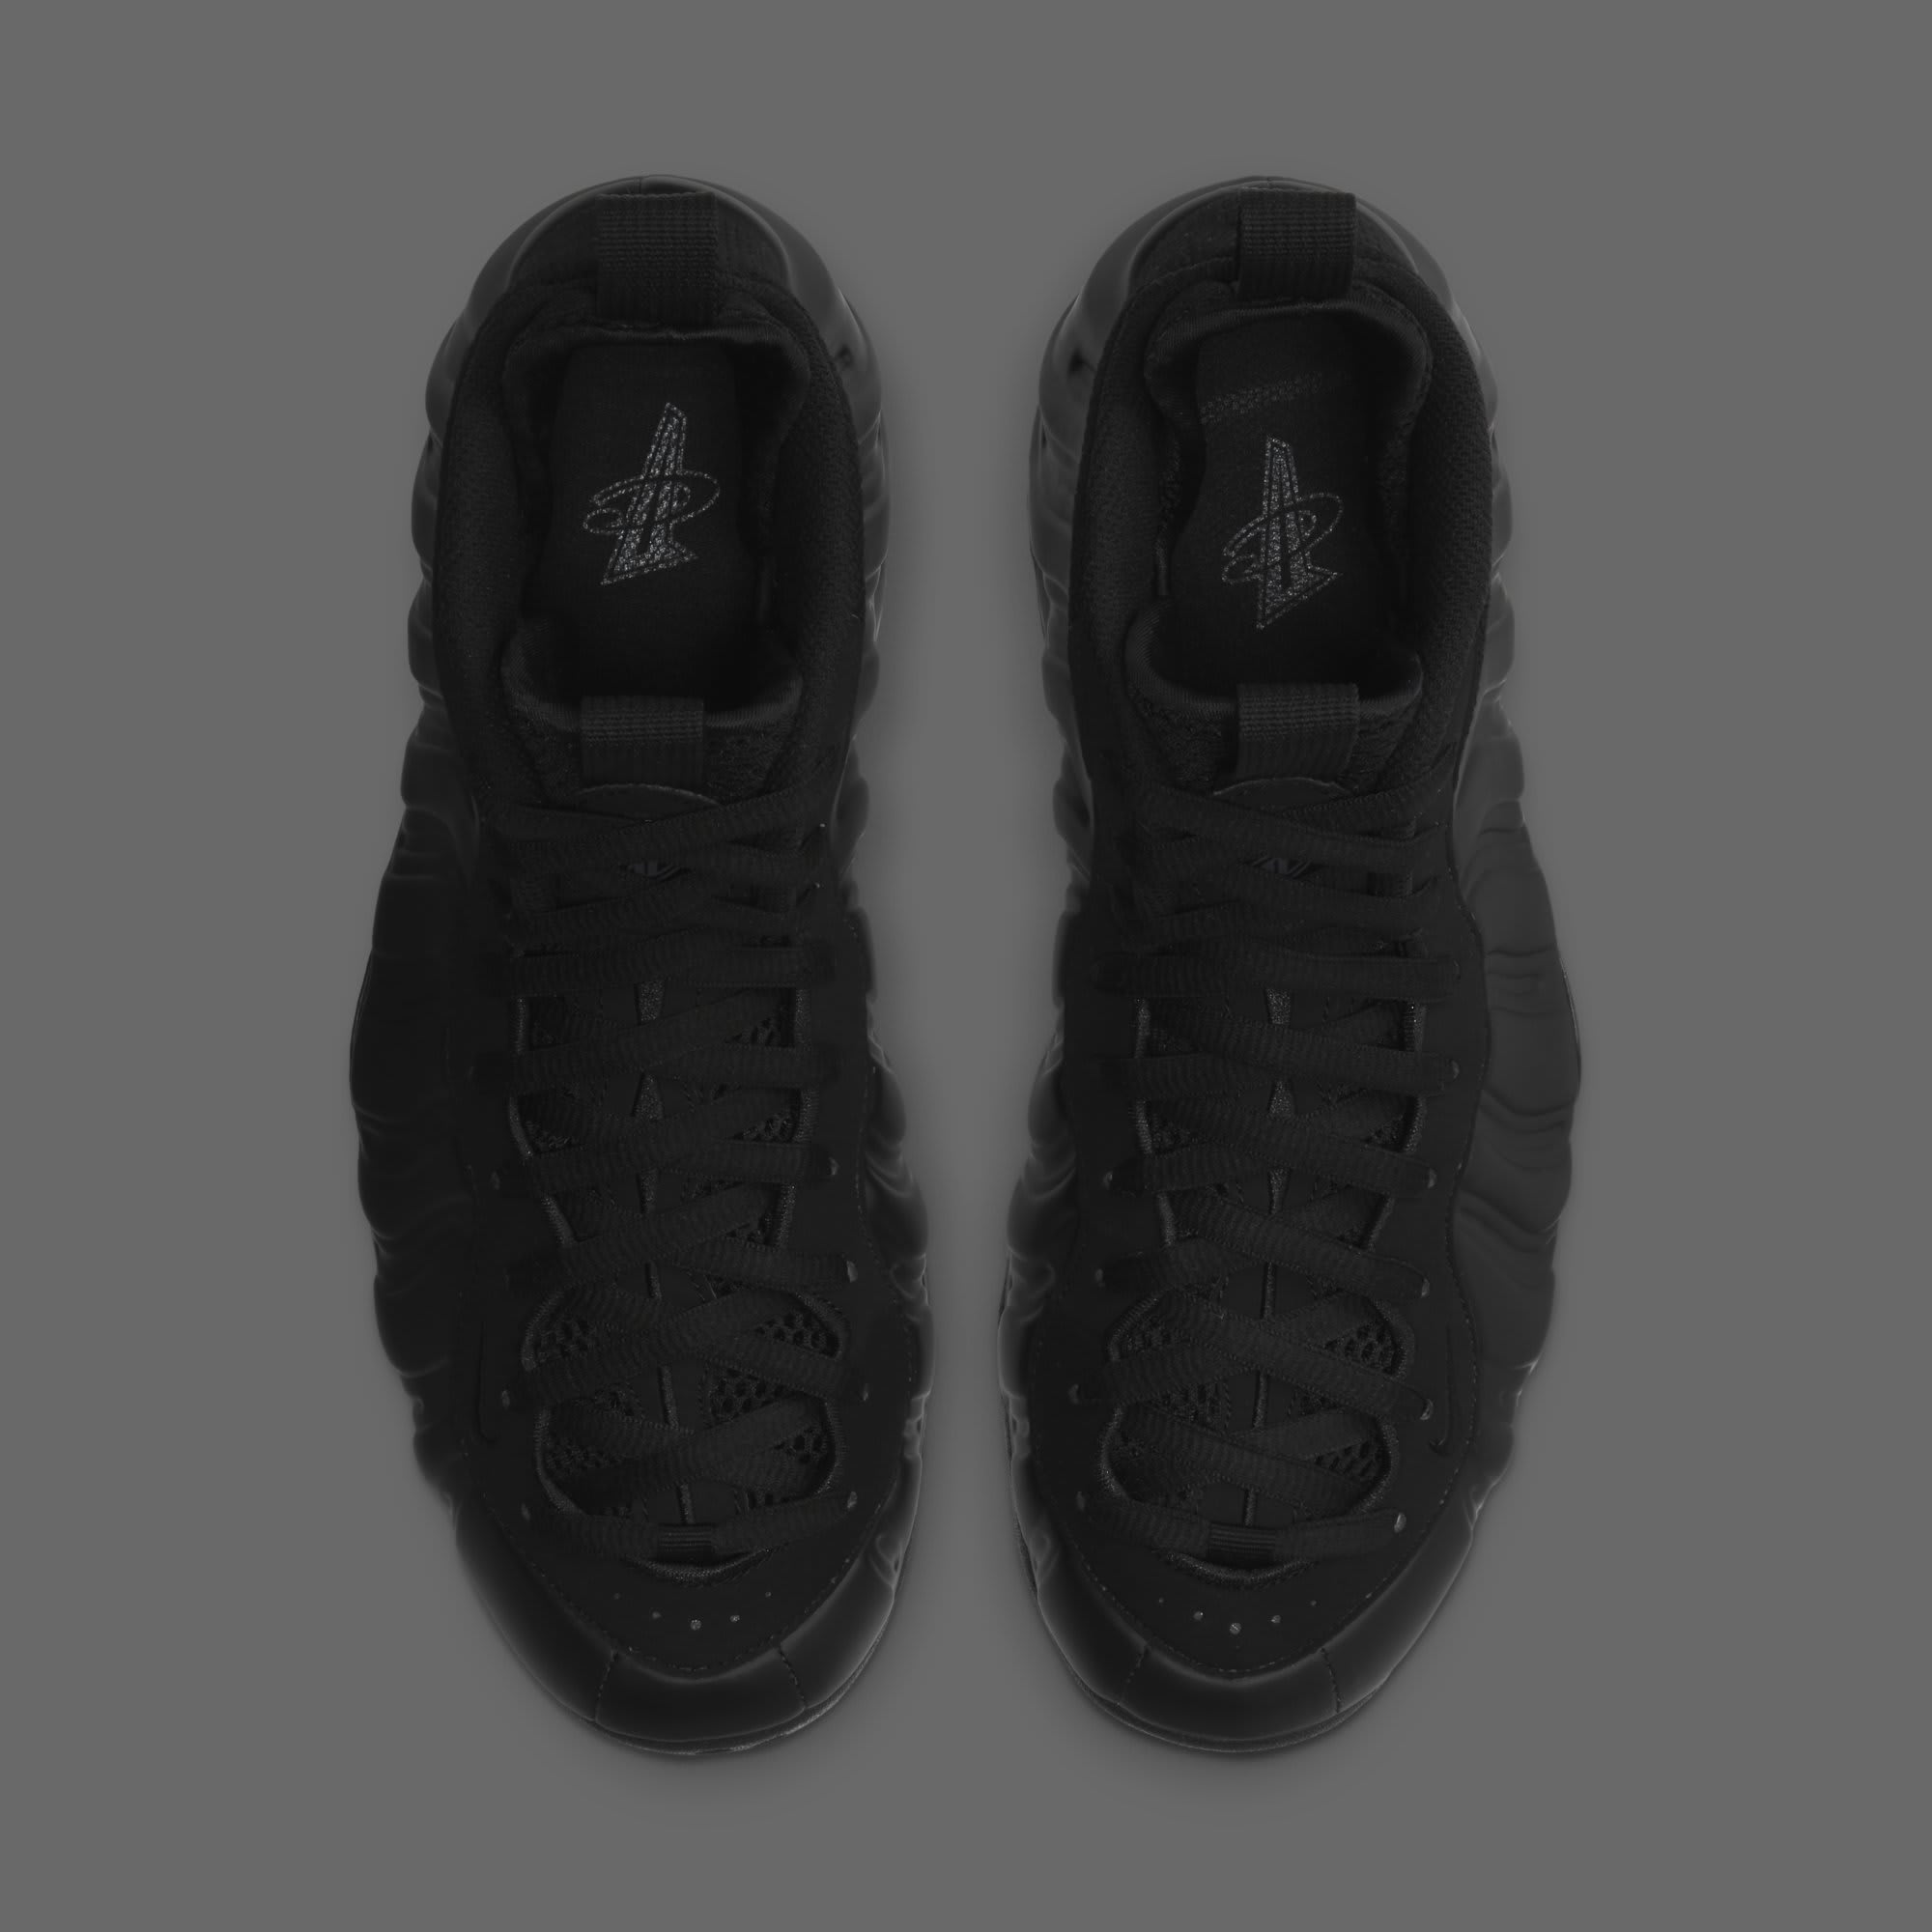 anthracite foams 2020